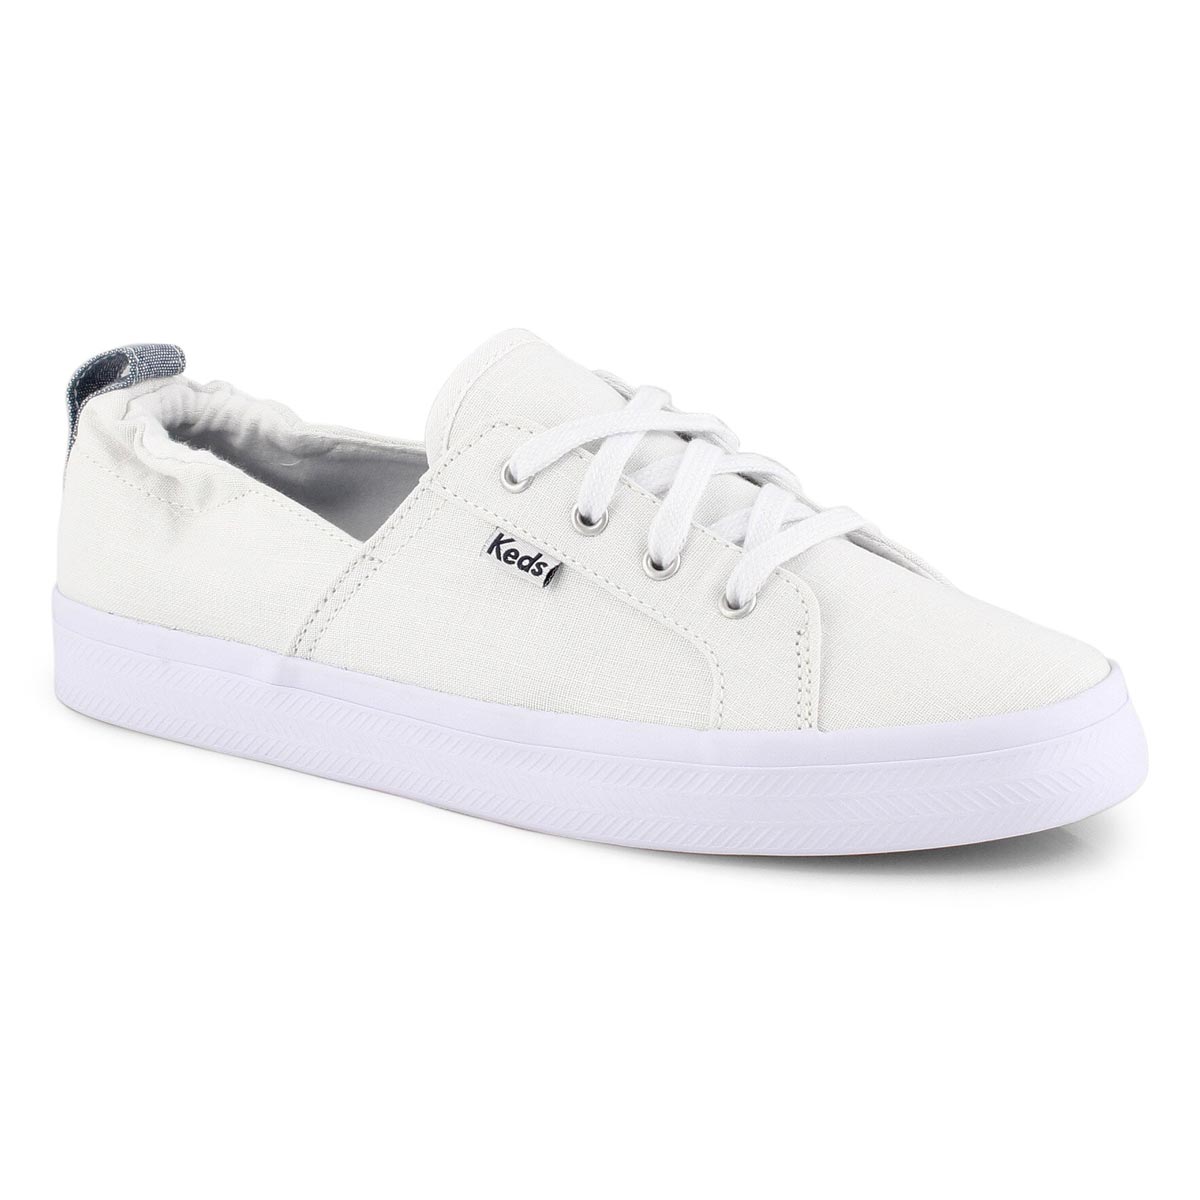 Keds Women's DARCY white lace up 